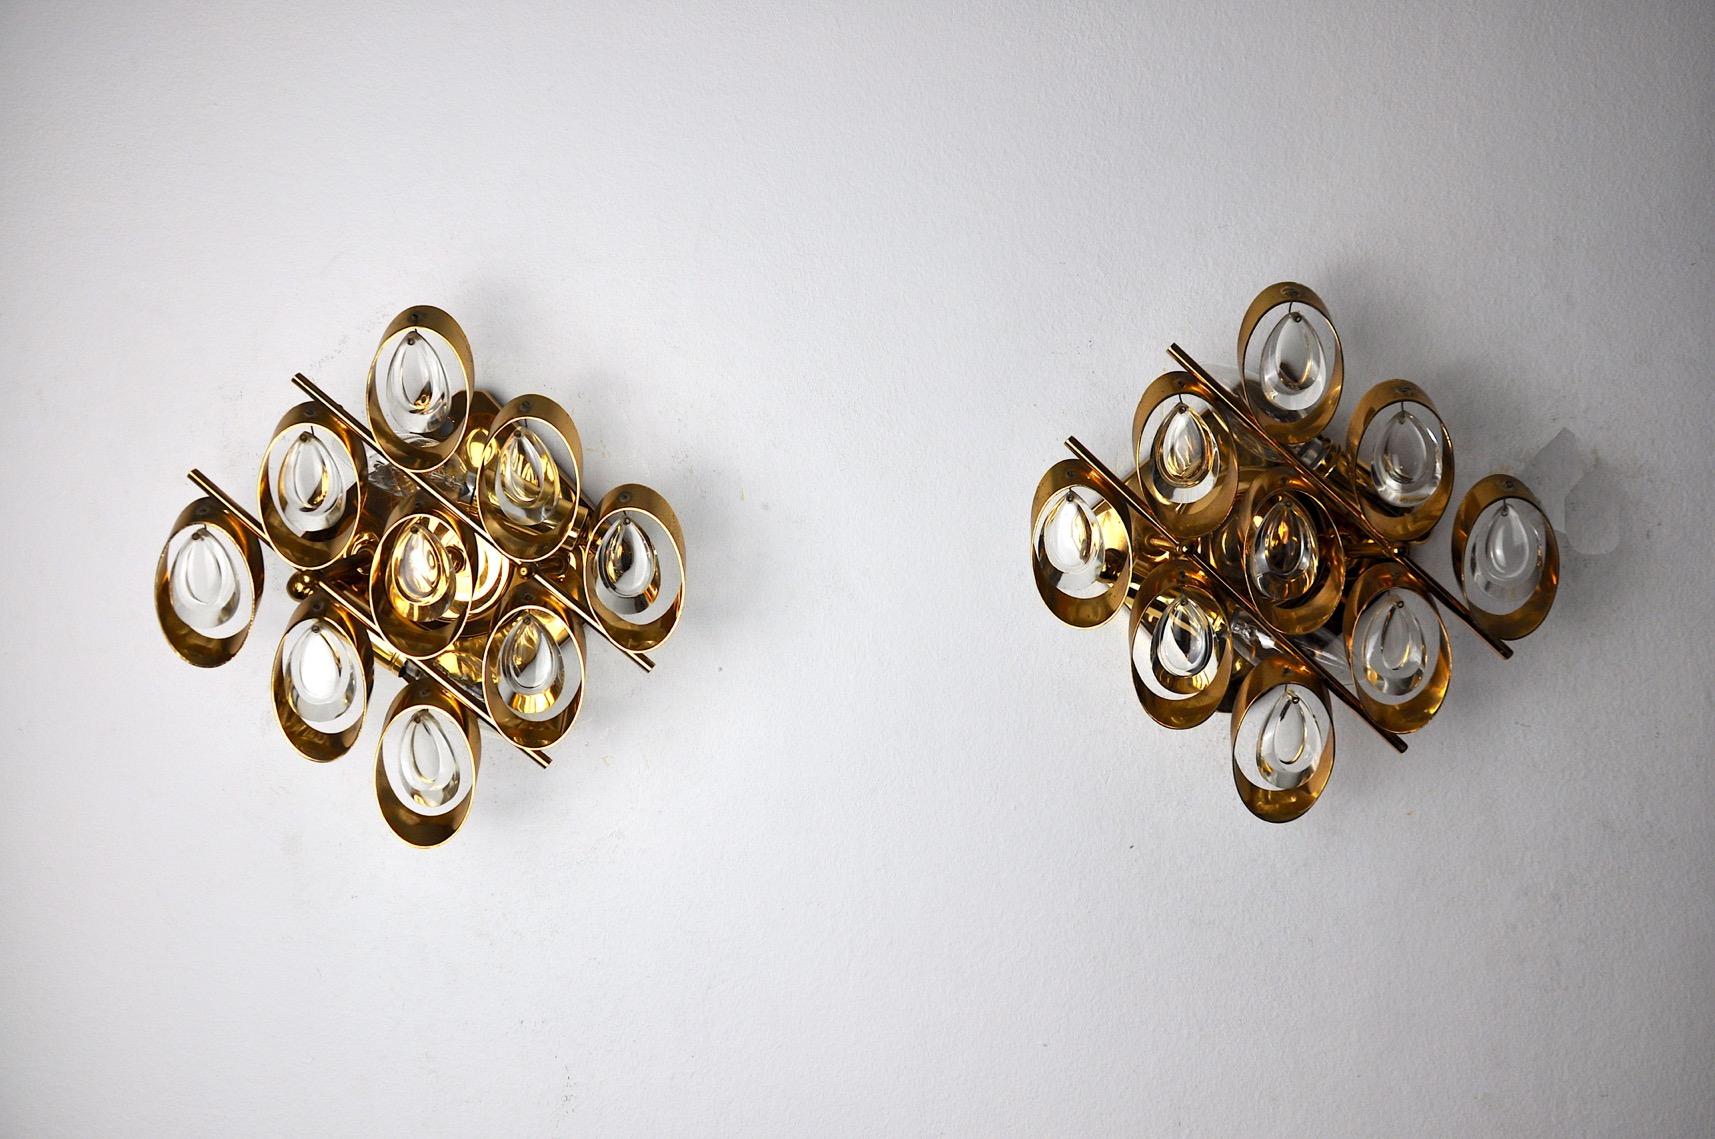 Very nice pair of oscar torlasco wall lights produced in italy in the 70s. Oval glass and gilt metal structure. Unique object that will illuminate wonderfully and bring a real design touch to your interior. Electricity checked, mark of time in